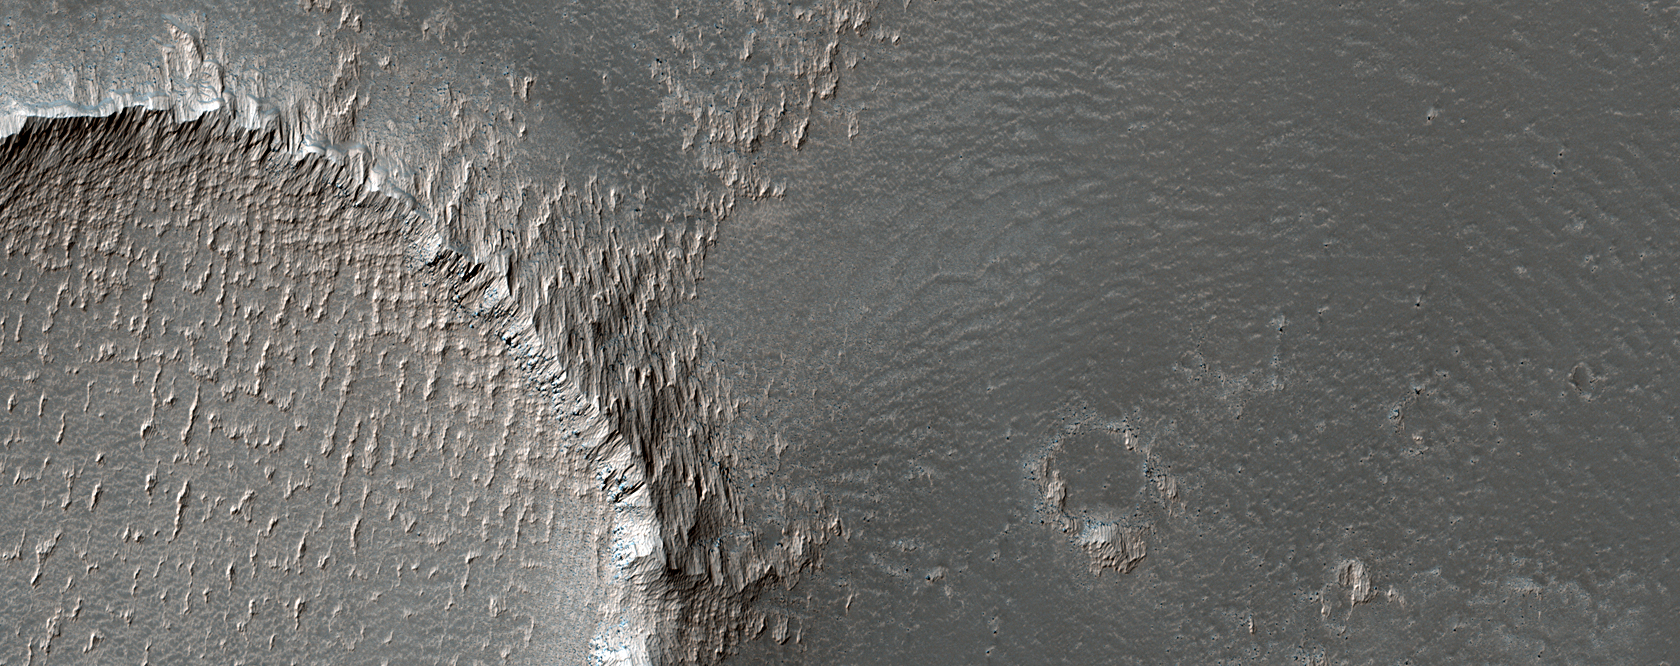 Sculpted Surfaces on the Slopes of Arsia Mons